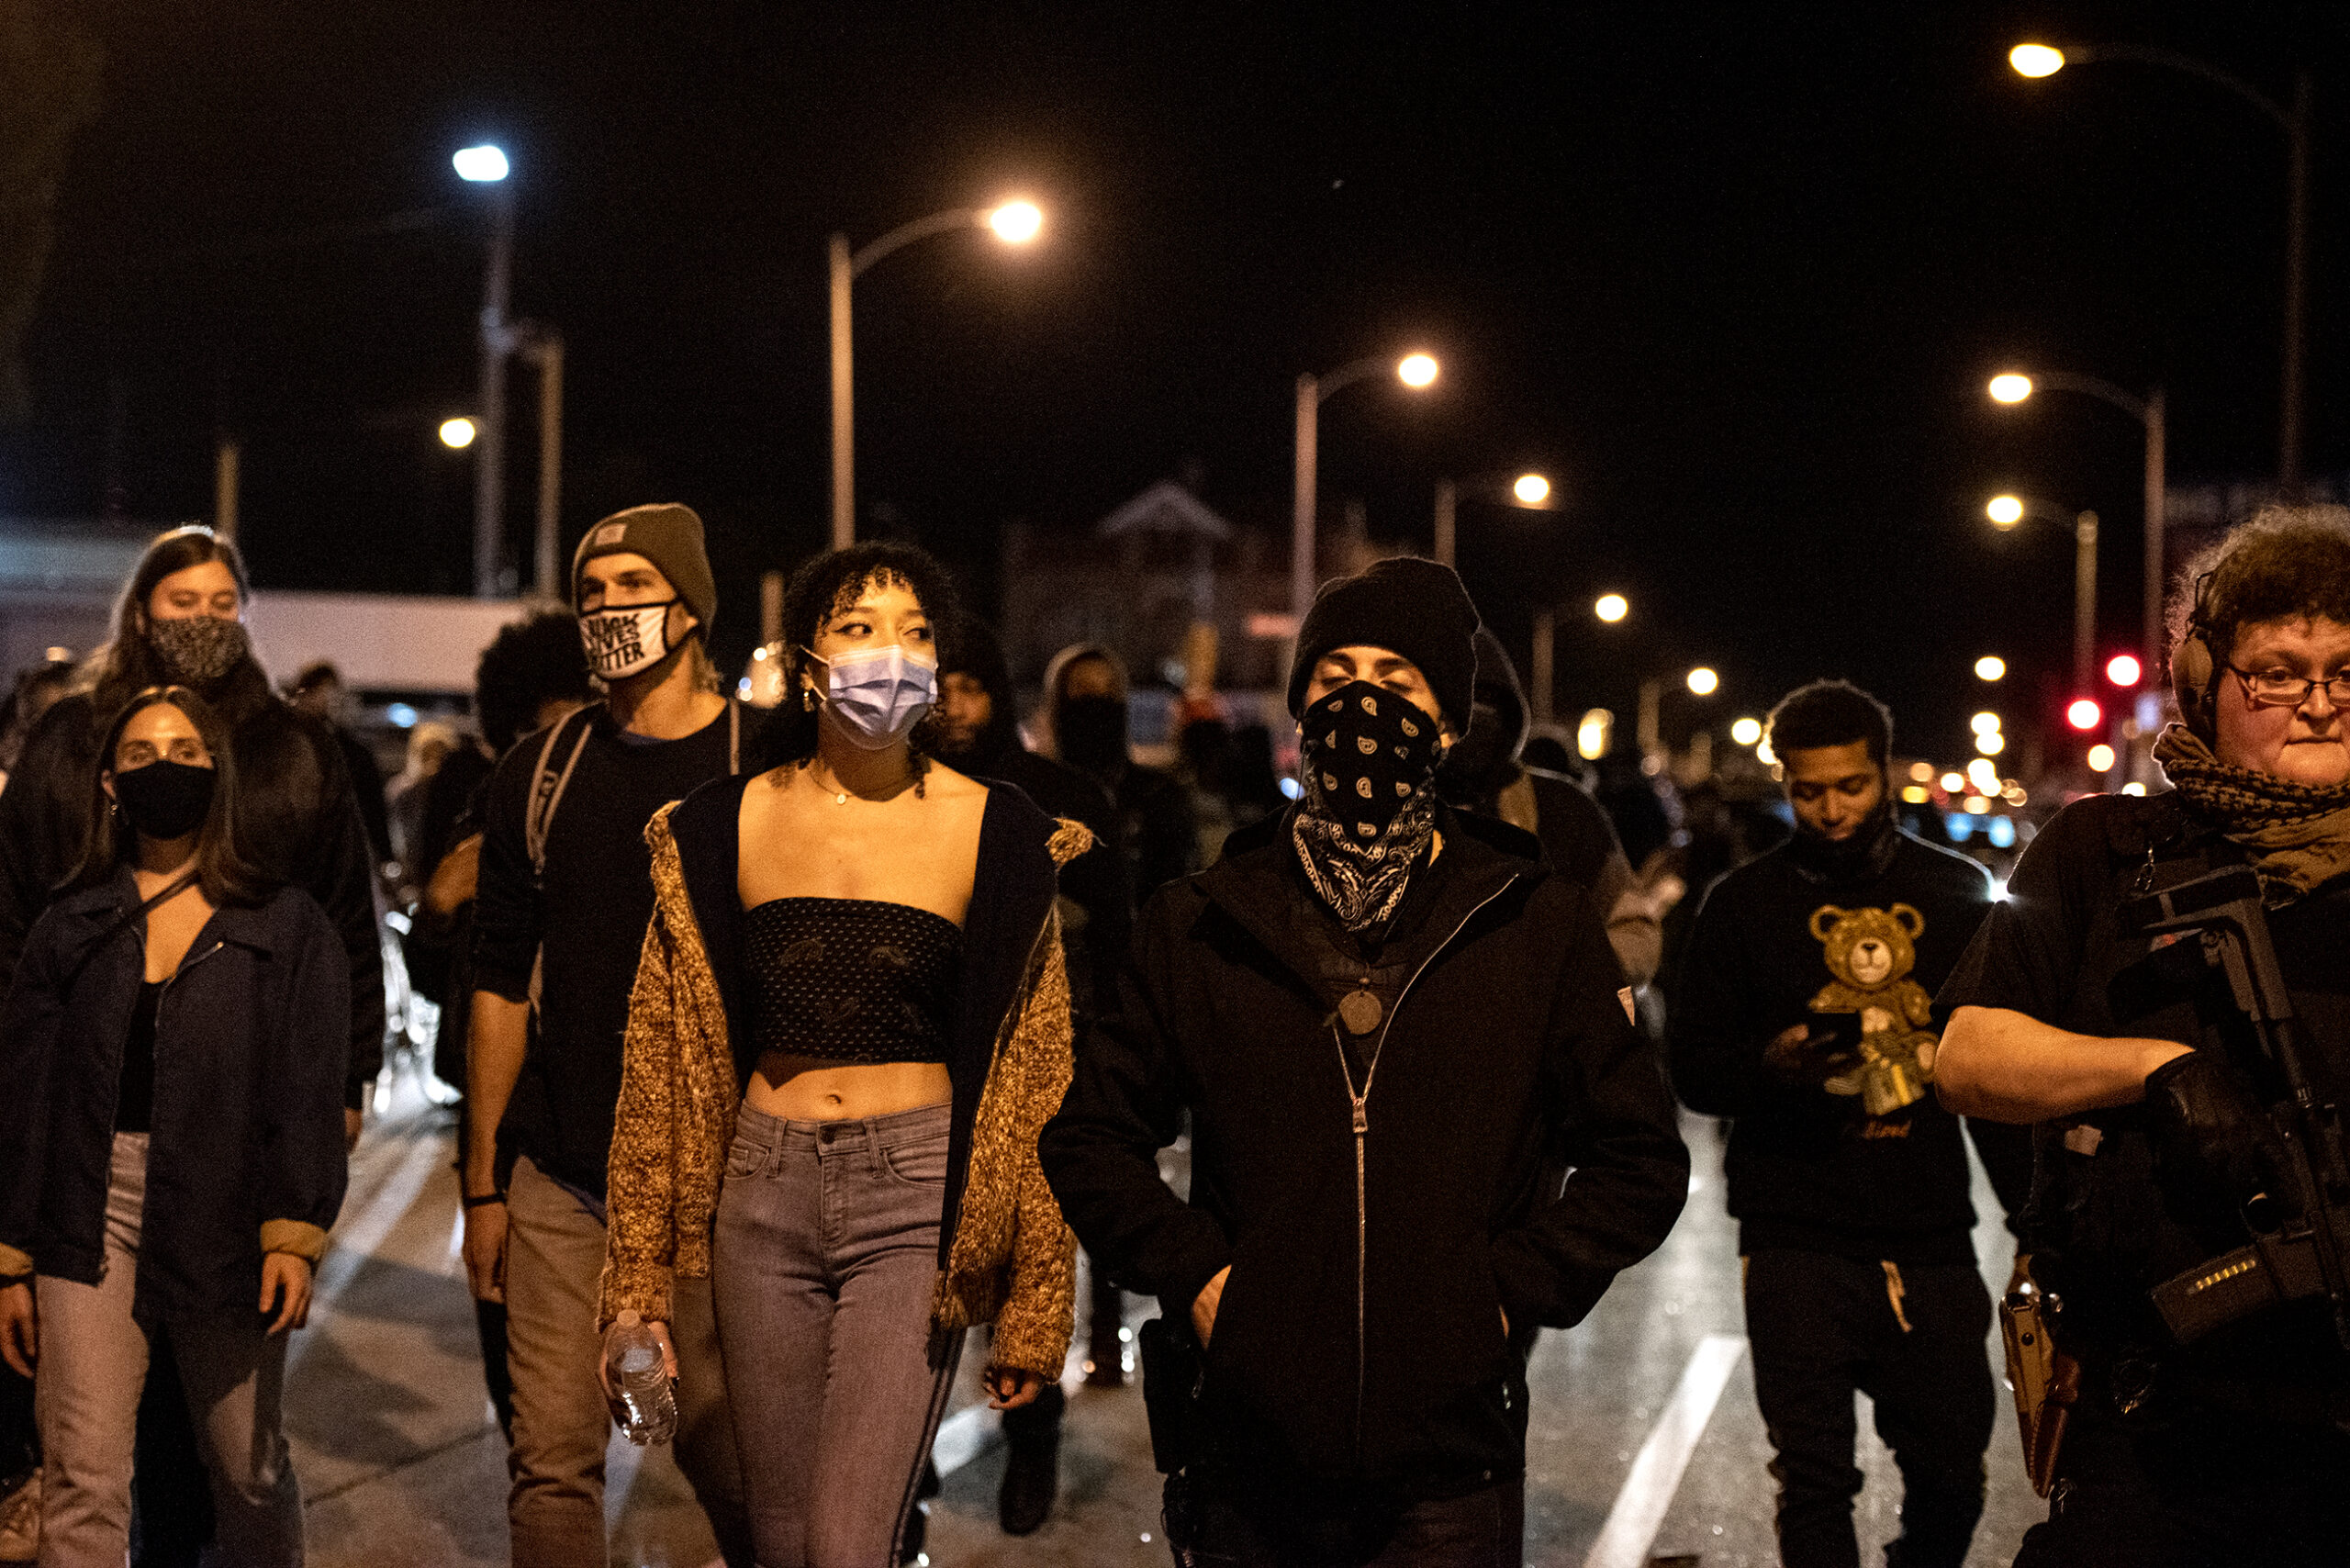 Protesters march in the street at night